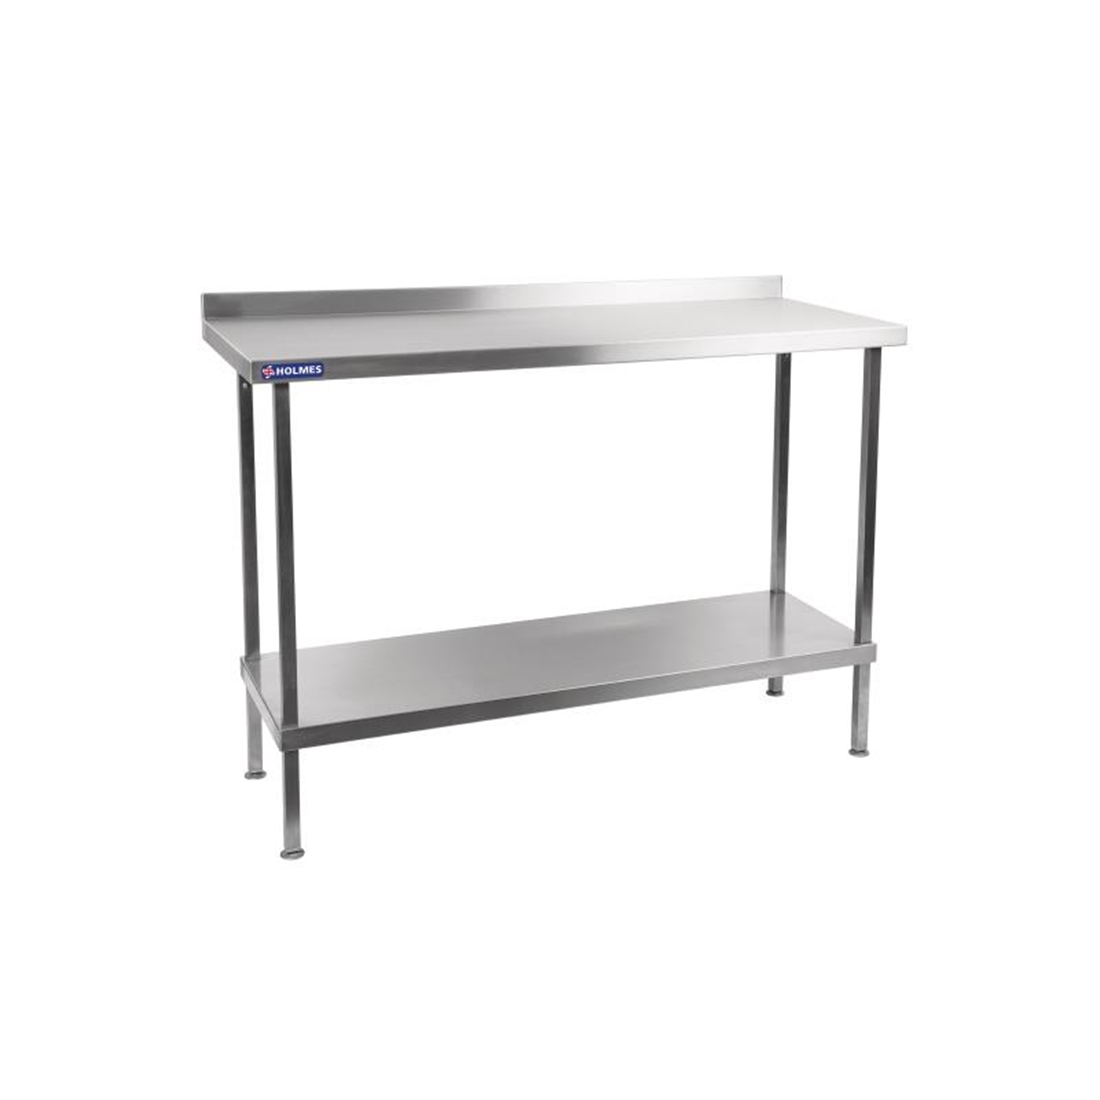 Holmes Self Assembly Stainless Steel Wall Table 600mm